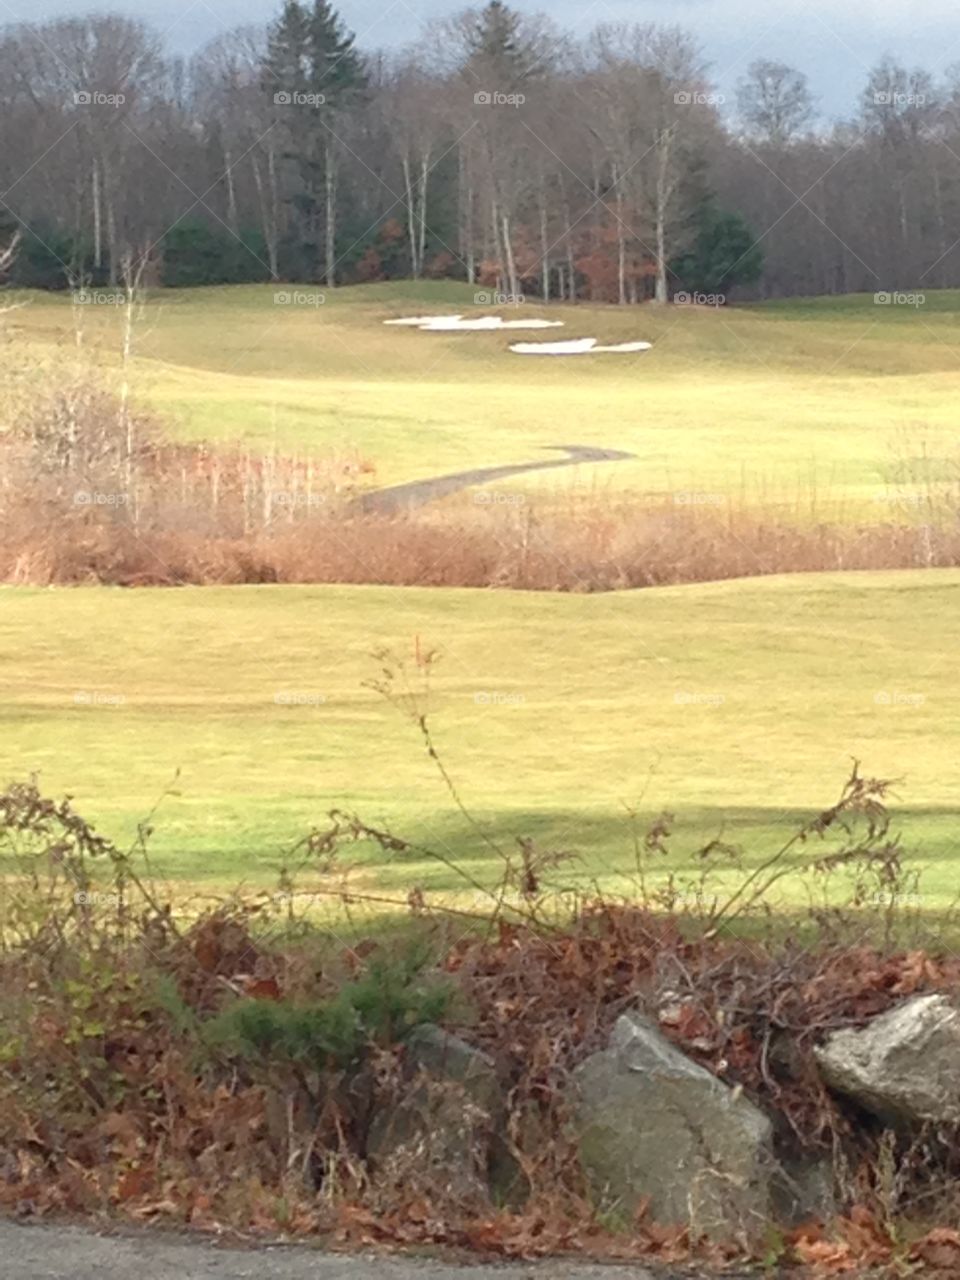 So fortunate to be looking out my bedroom window to see the golf course 